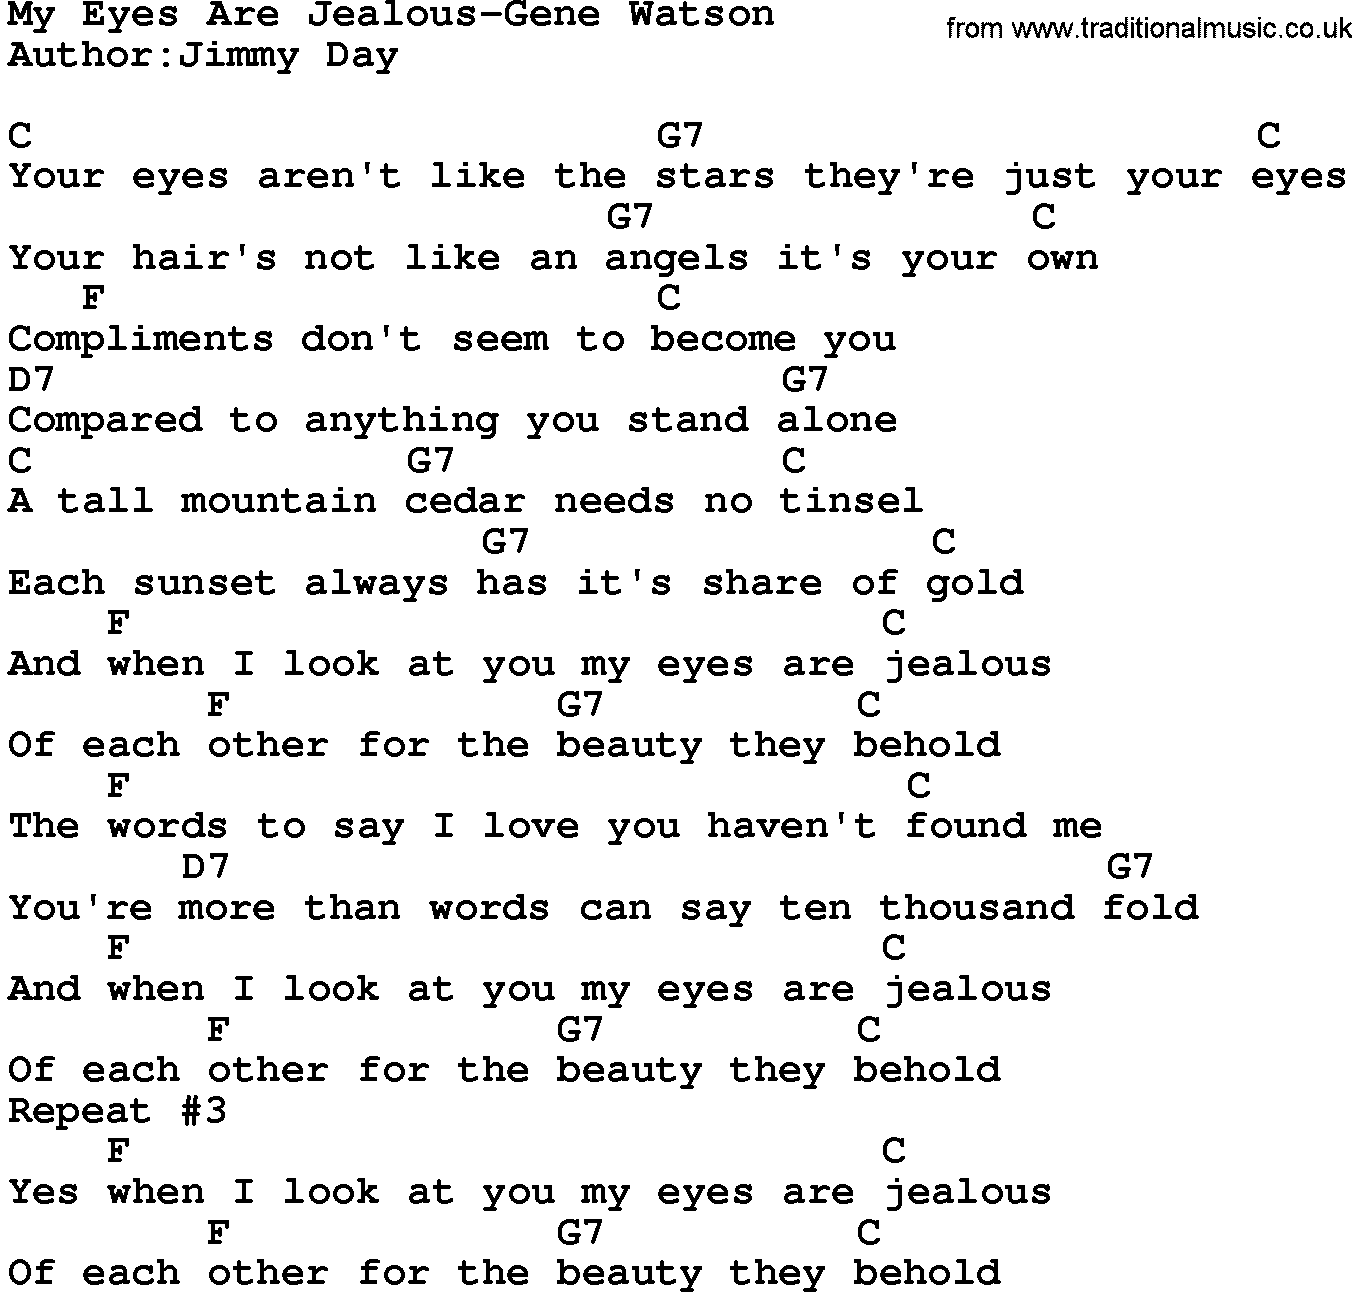 Country music song: My Eyes Are Jealous-Gene Watson lyrics and chords